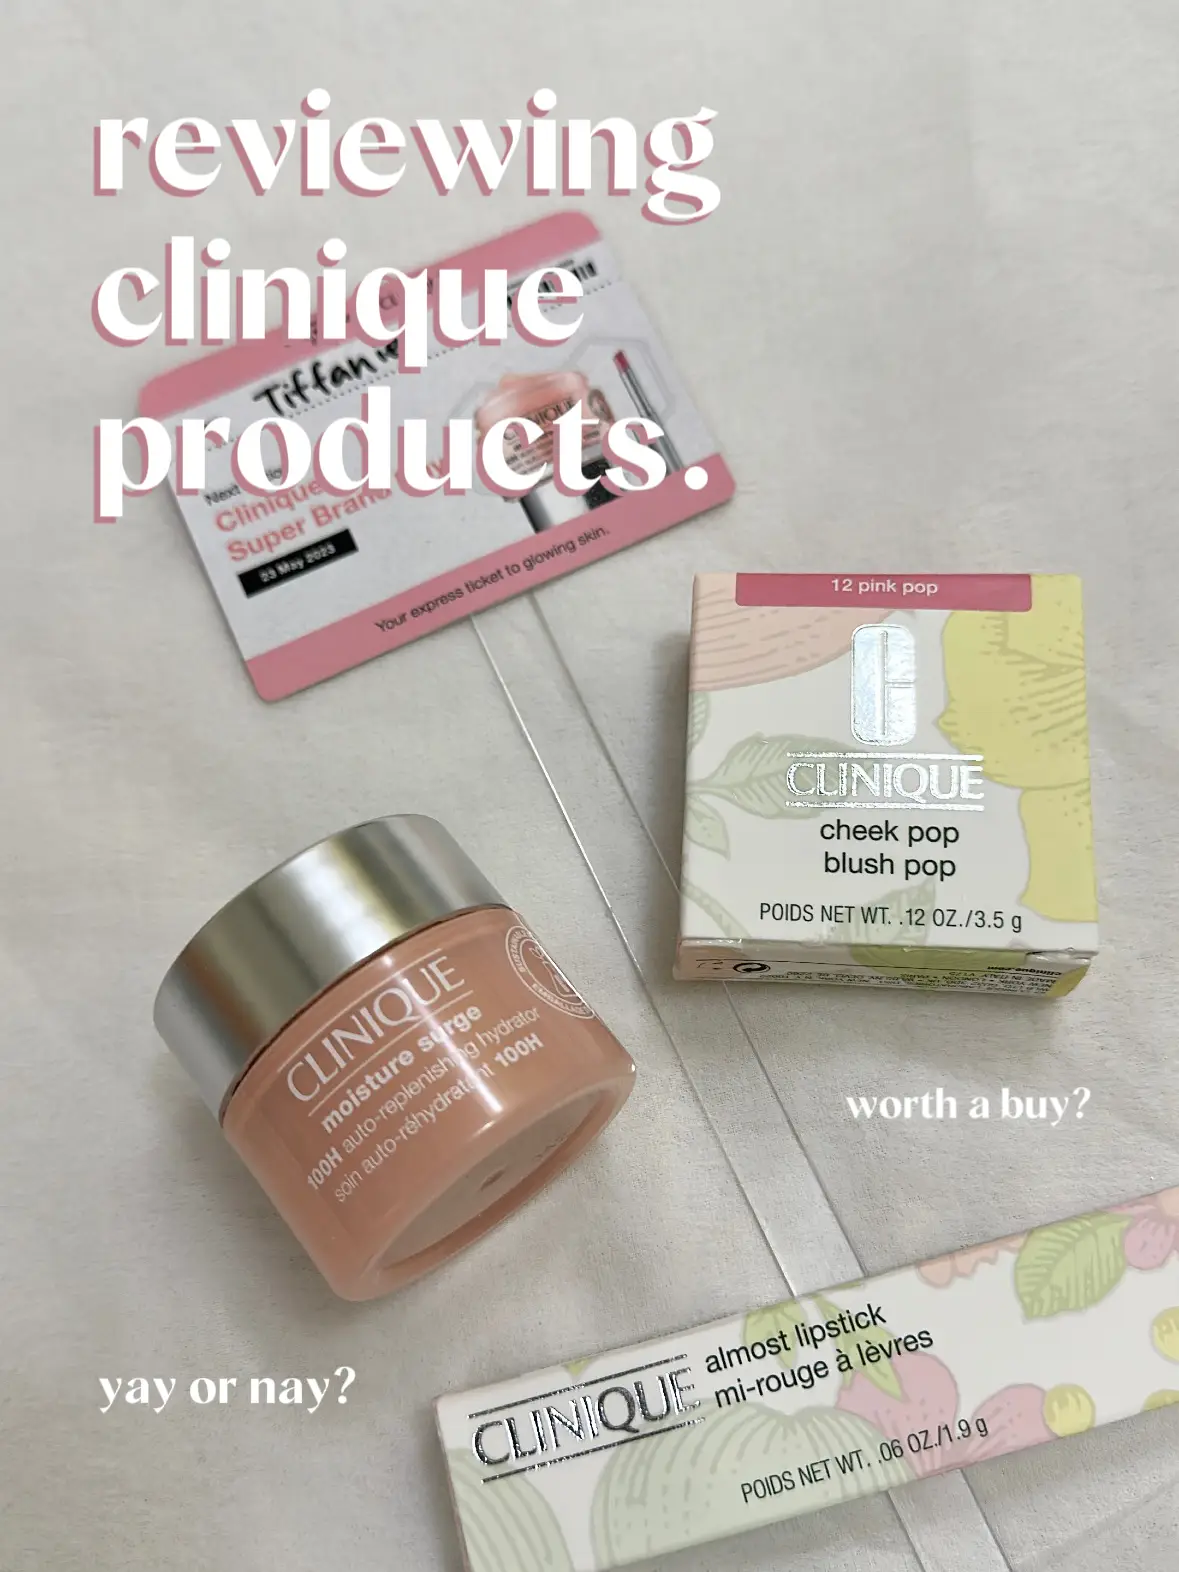 ARE THESE THREE PRODUCTS FROM CLINIQUE ANY GOOD? 🤔's images